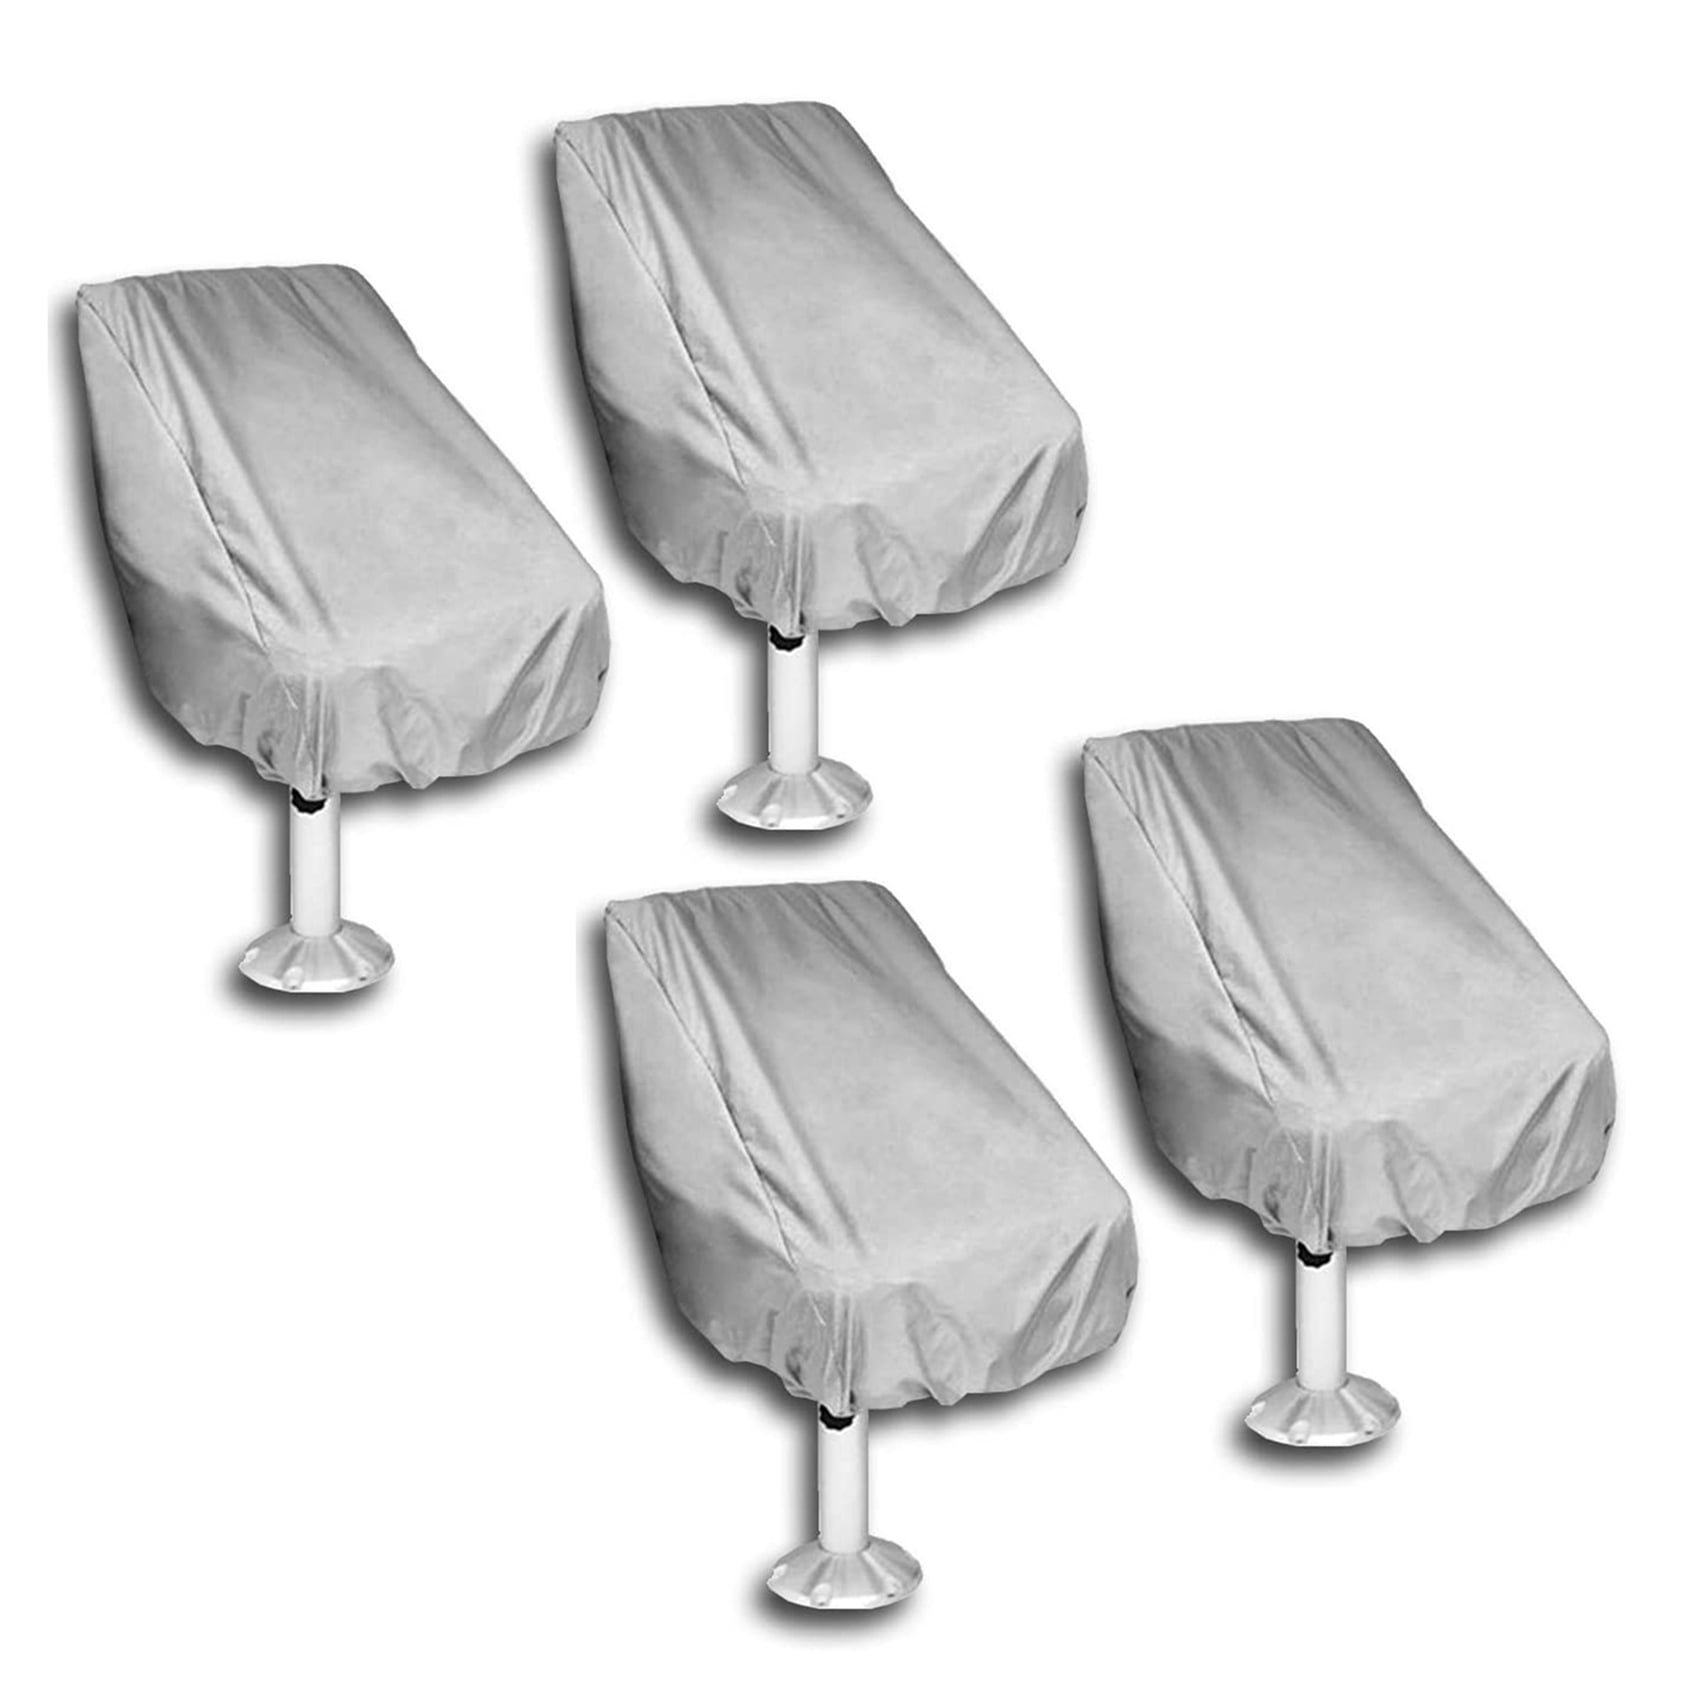 Details about   1X Boat Seat Cover,Outdoor Waterproof Pontoon Captain Boat Bench Chair Sea E0G9 